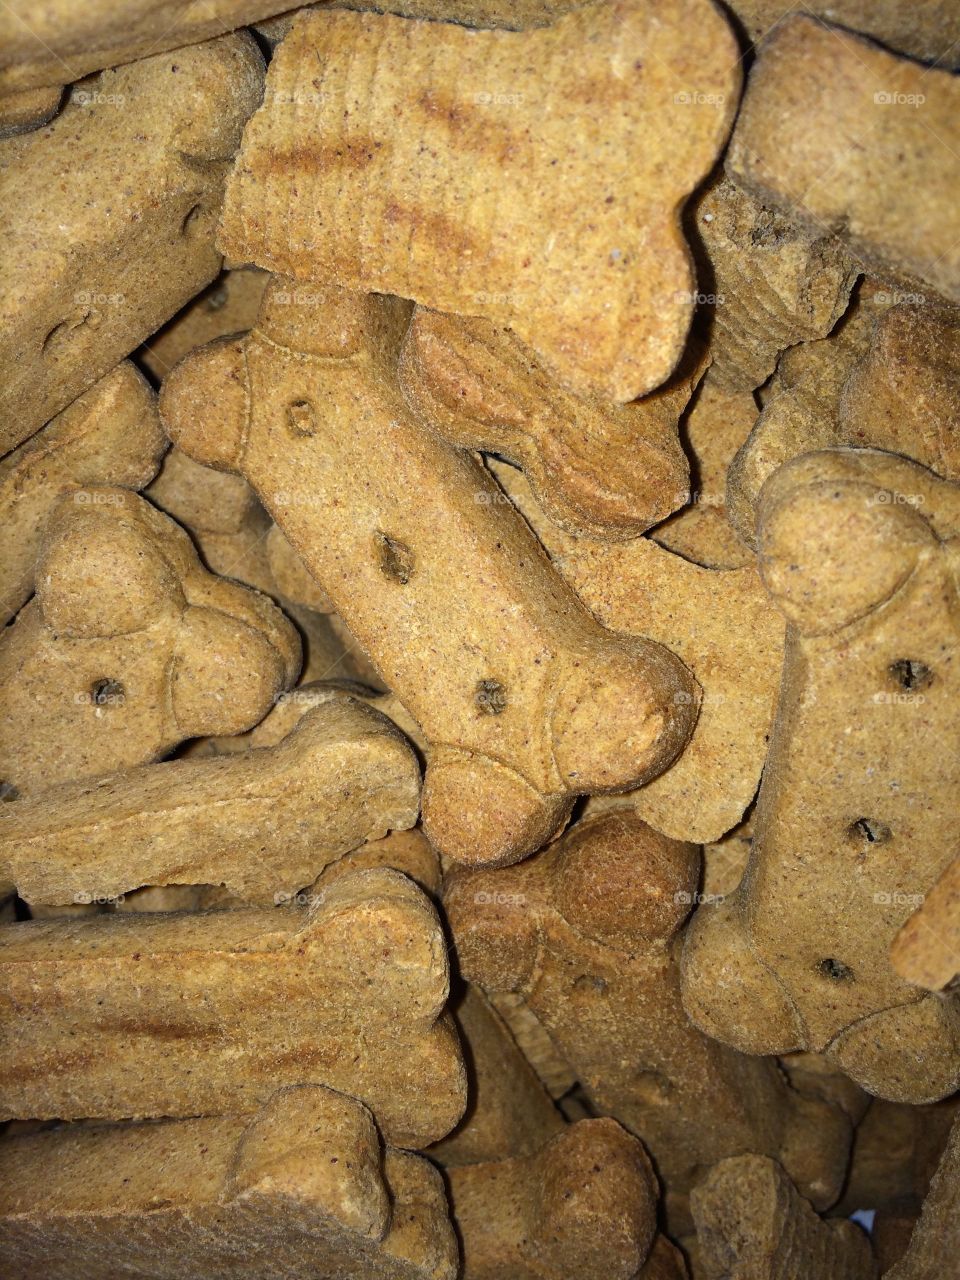 A dogs delight . Dog cookies